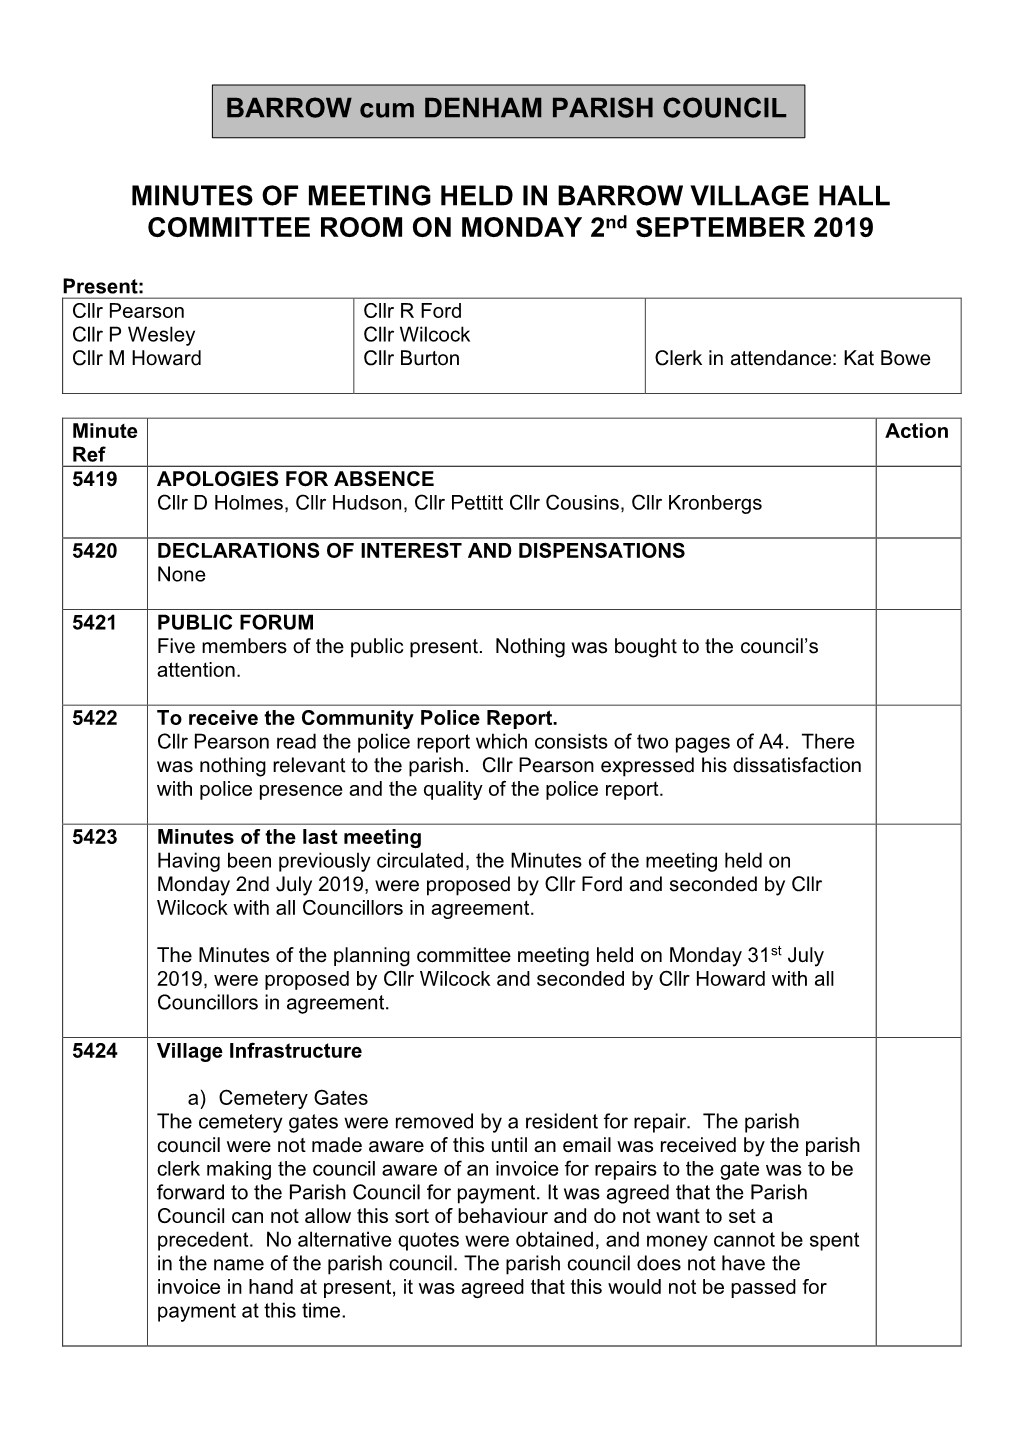 MINUTES of MEETING HELD in BARROW VILLAGE HALL COMMITTEE ROOM on MONDAY 2Nd SEPTEMBER 2019